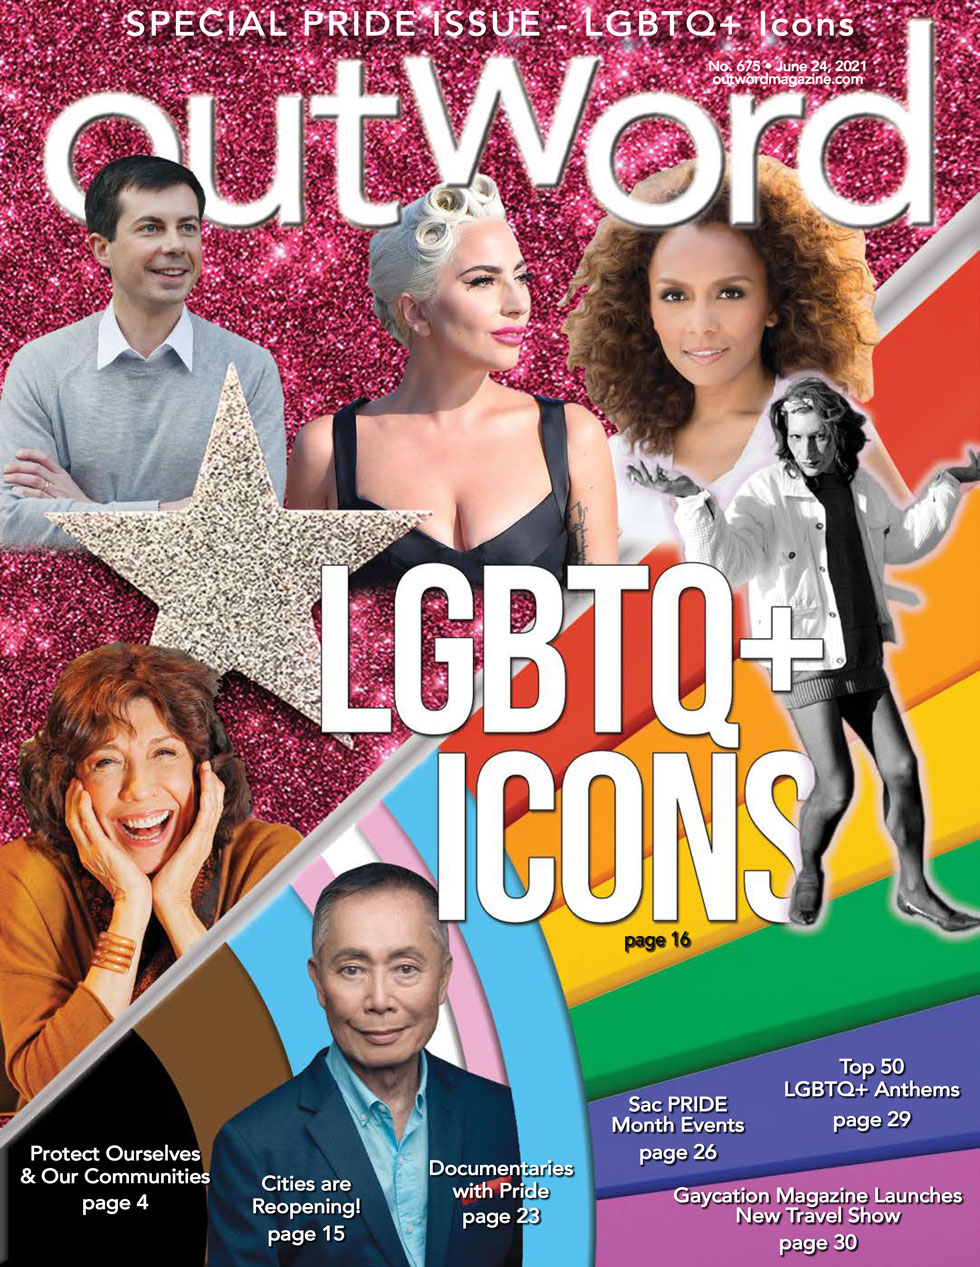 June 24, 2021 | The new issue of Outword, Pride Three, LGBTQ+ Icons is Out Now!